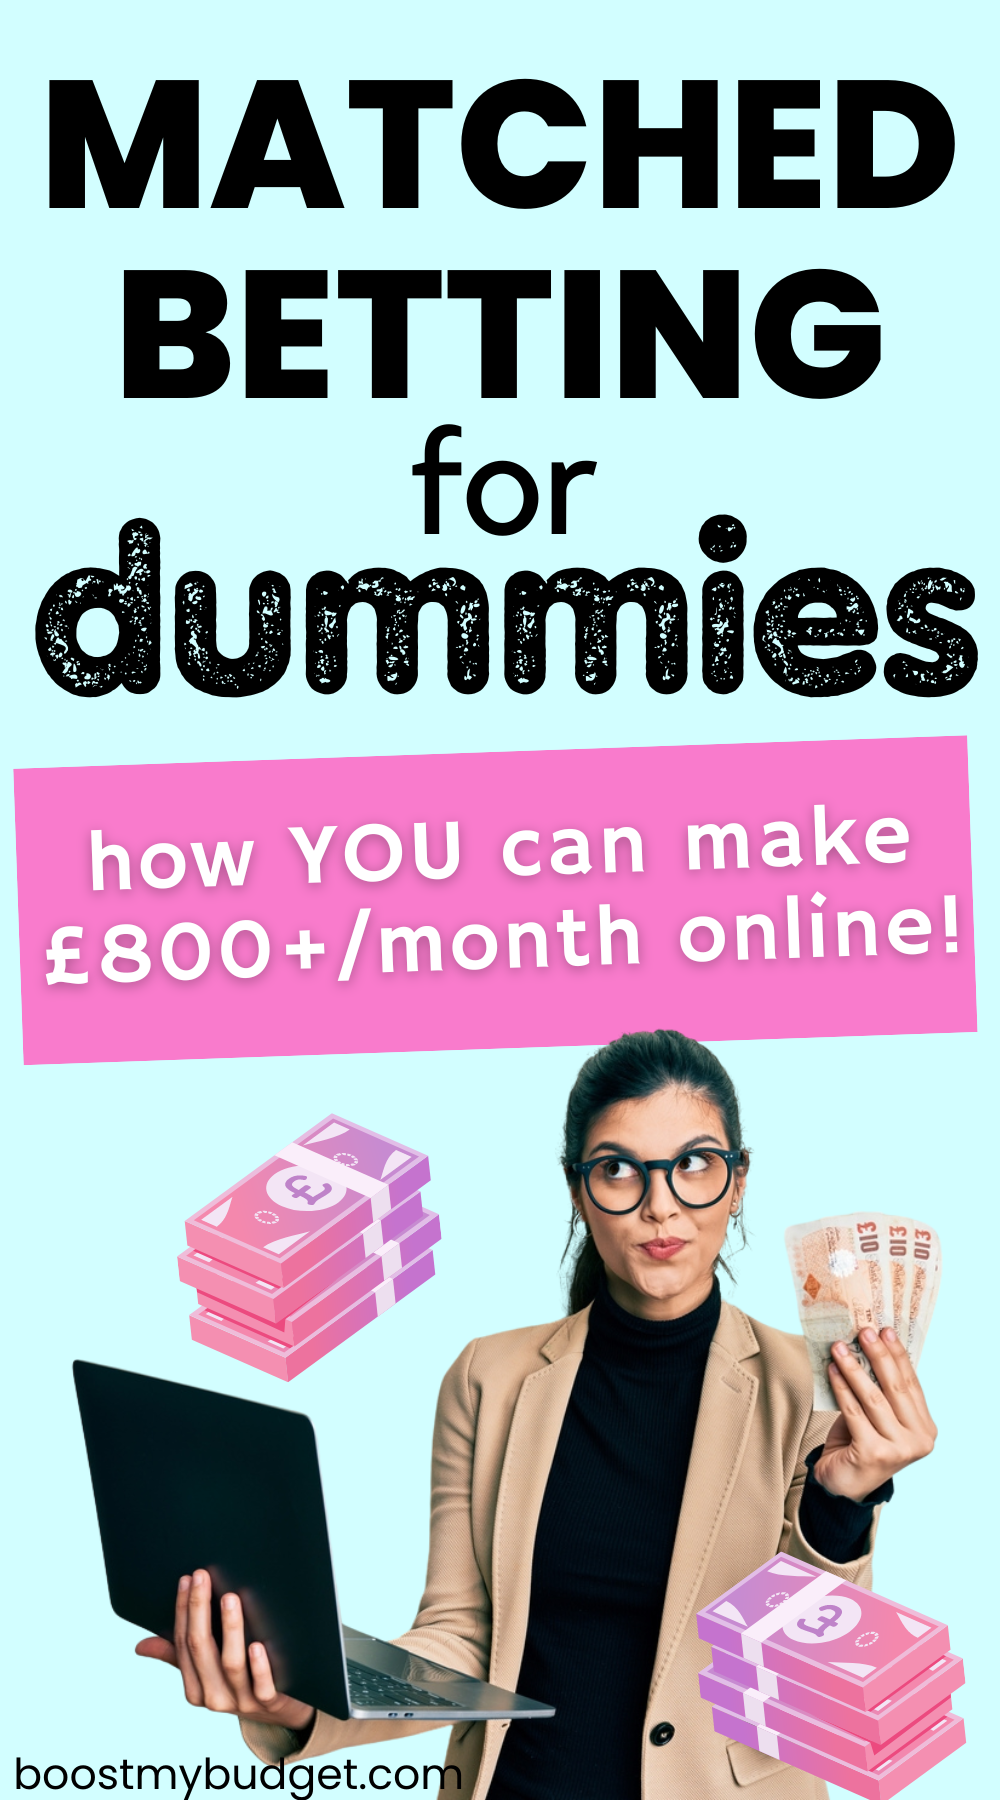 Image featuring the text: Matched betting for dummies: how YOU can make £800+/month online! Below is an image of a smartly dressed young woman holding a laptop in one hand and a fan of money (£10 notes) in the other hand.